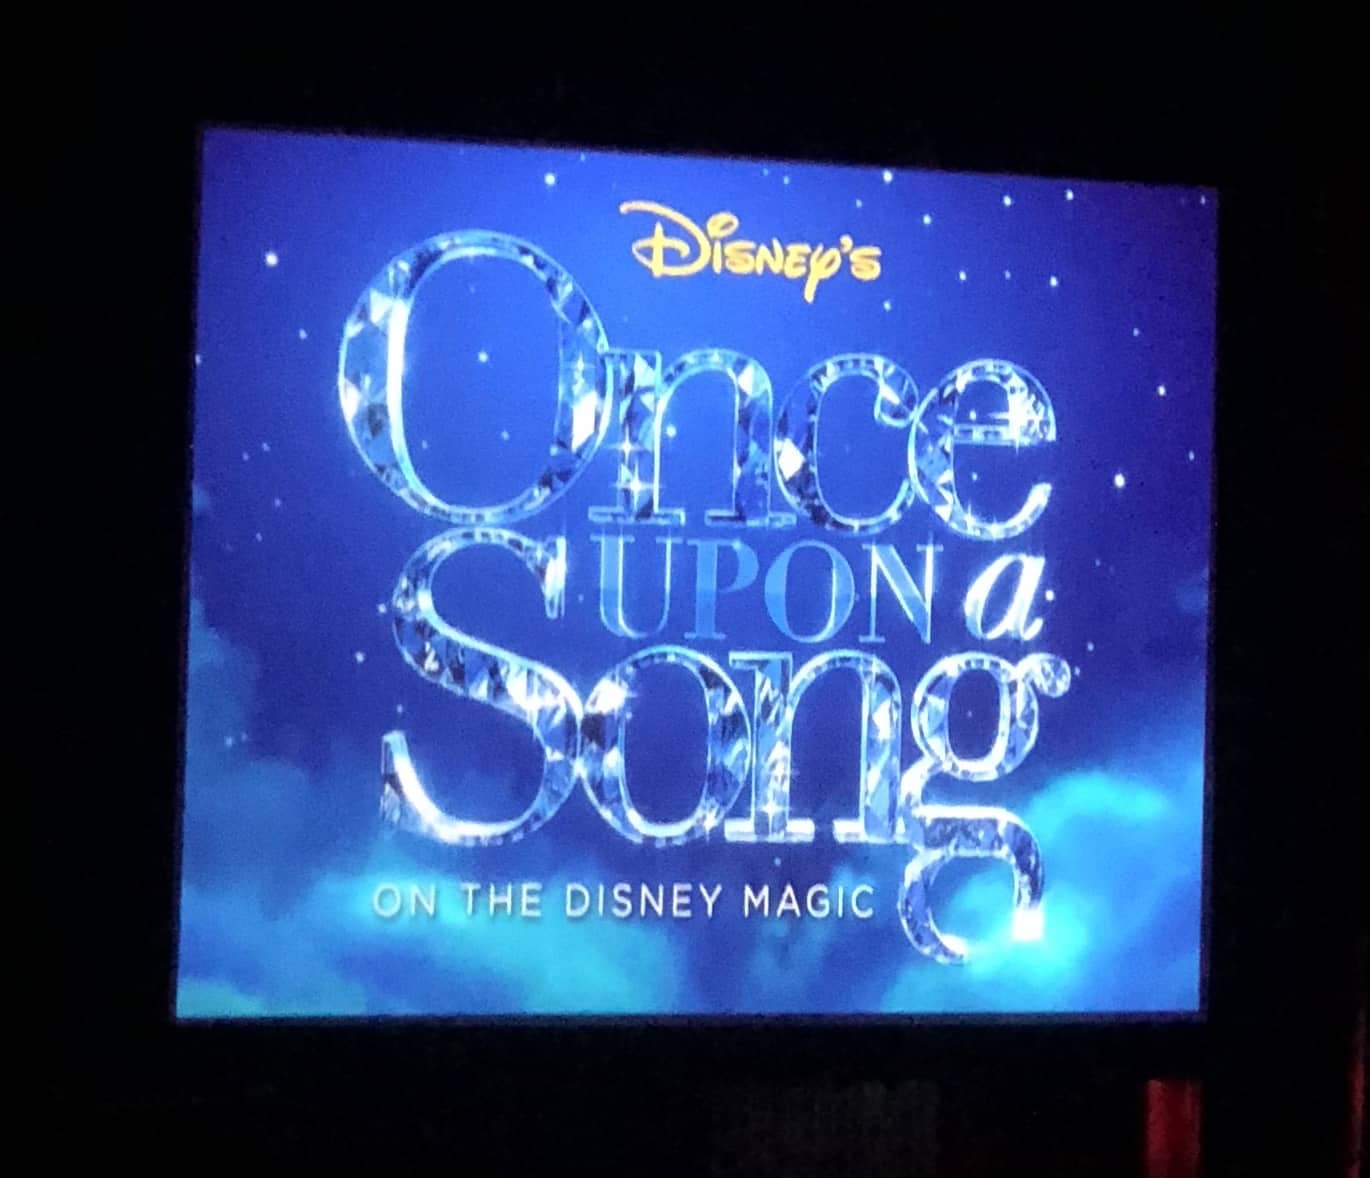 Once Upon a Song Disney Magic Westbound Transatlantic Cruise